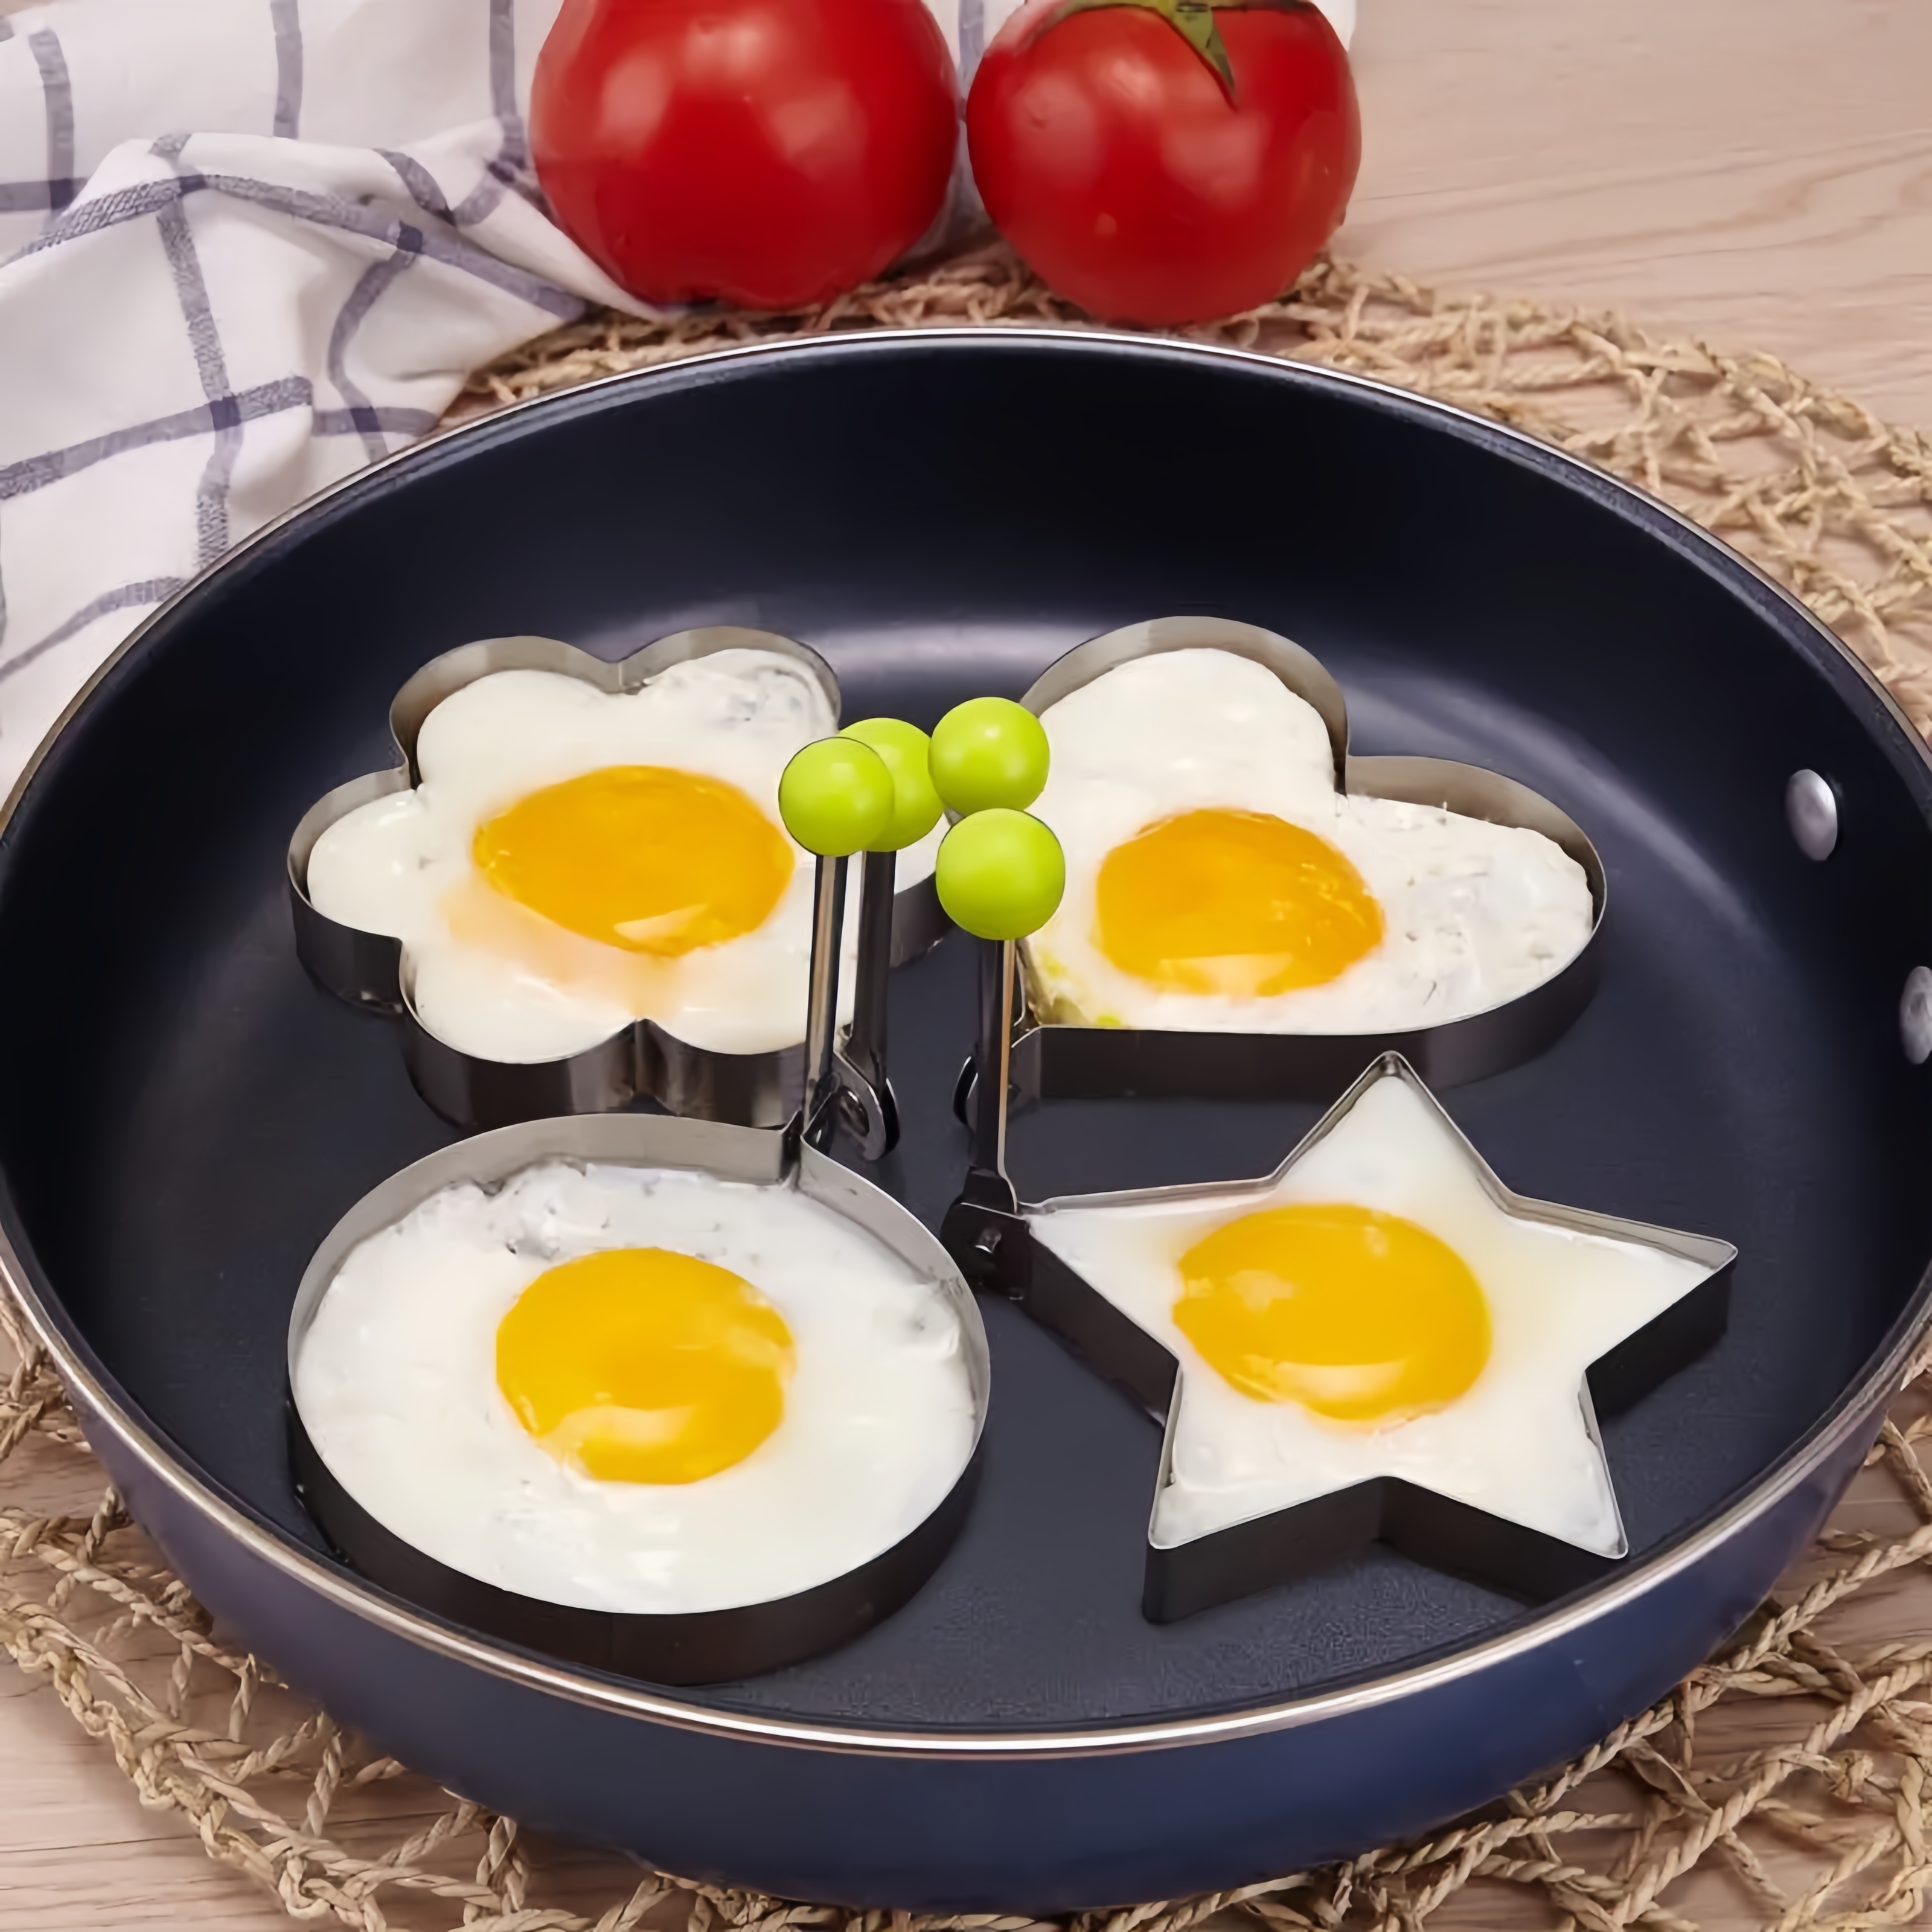 

4-piece Stainless Steel Egg Ring Set For Frying Or Shaping Eggs – Non-stick Fried Egg Mold With Heart, Star, Flower & Round Shapes – Safe For Food Contact, Ideal For Breakfast, Pancakes, Omelets